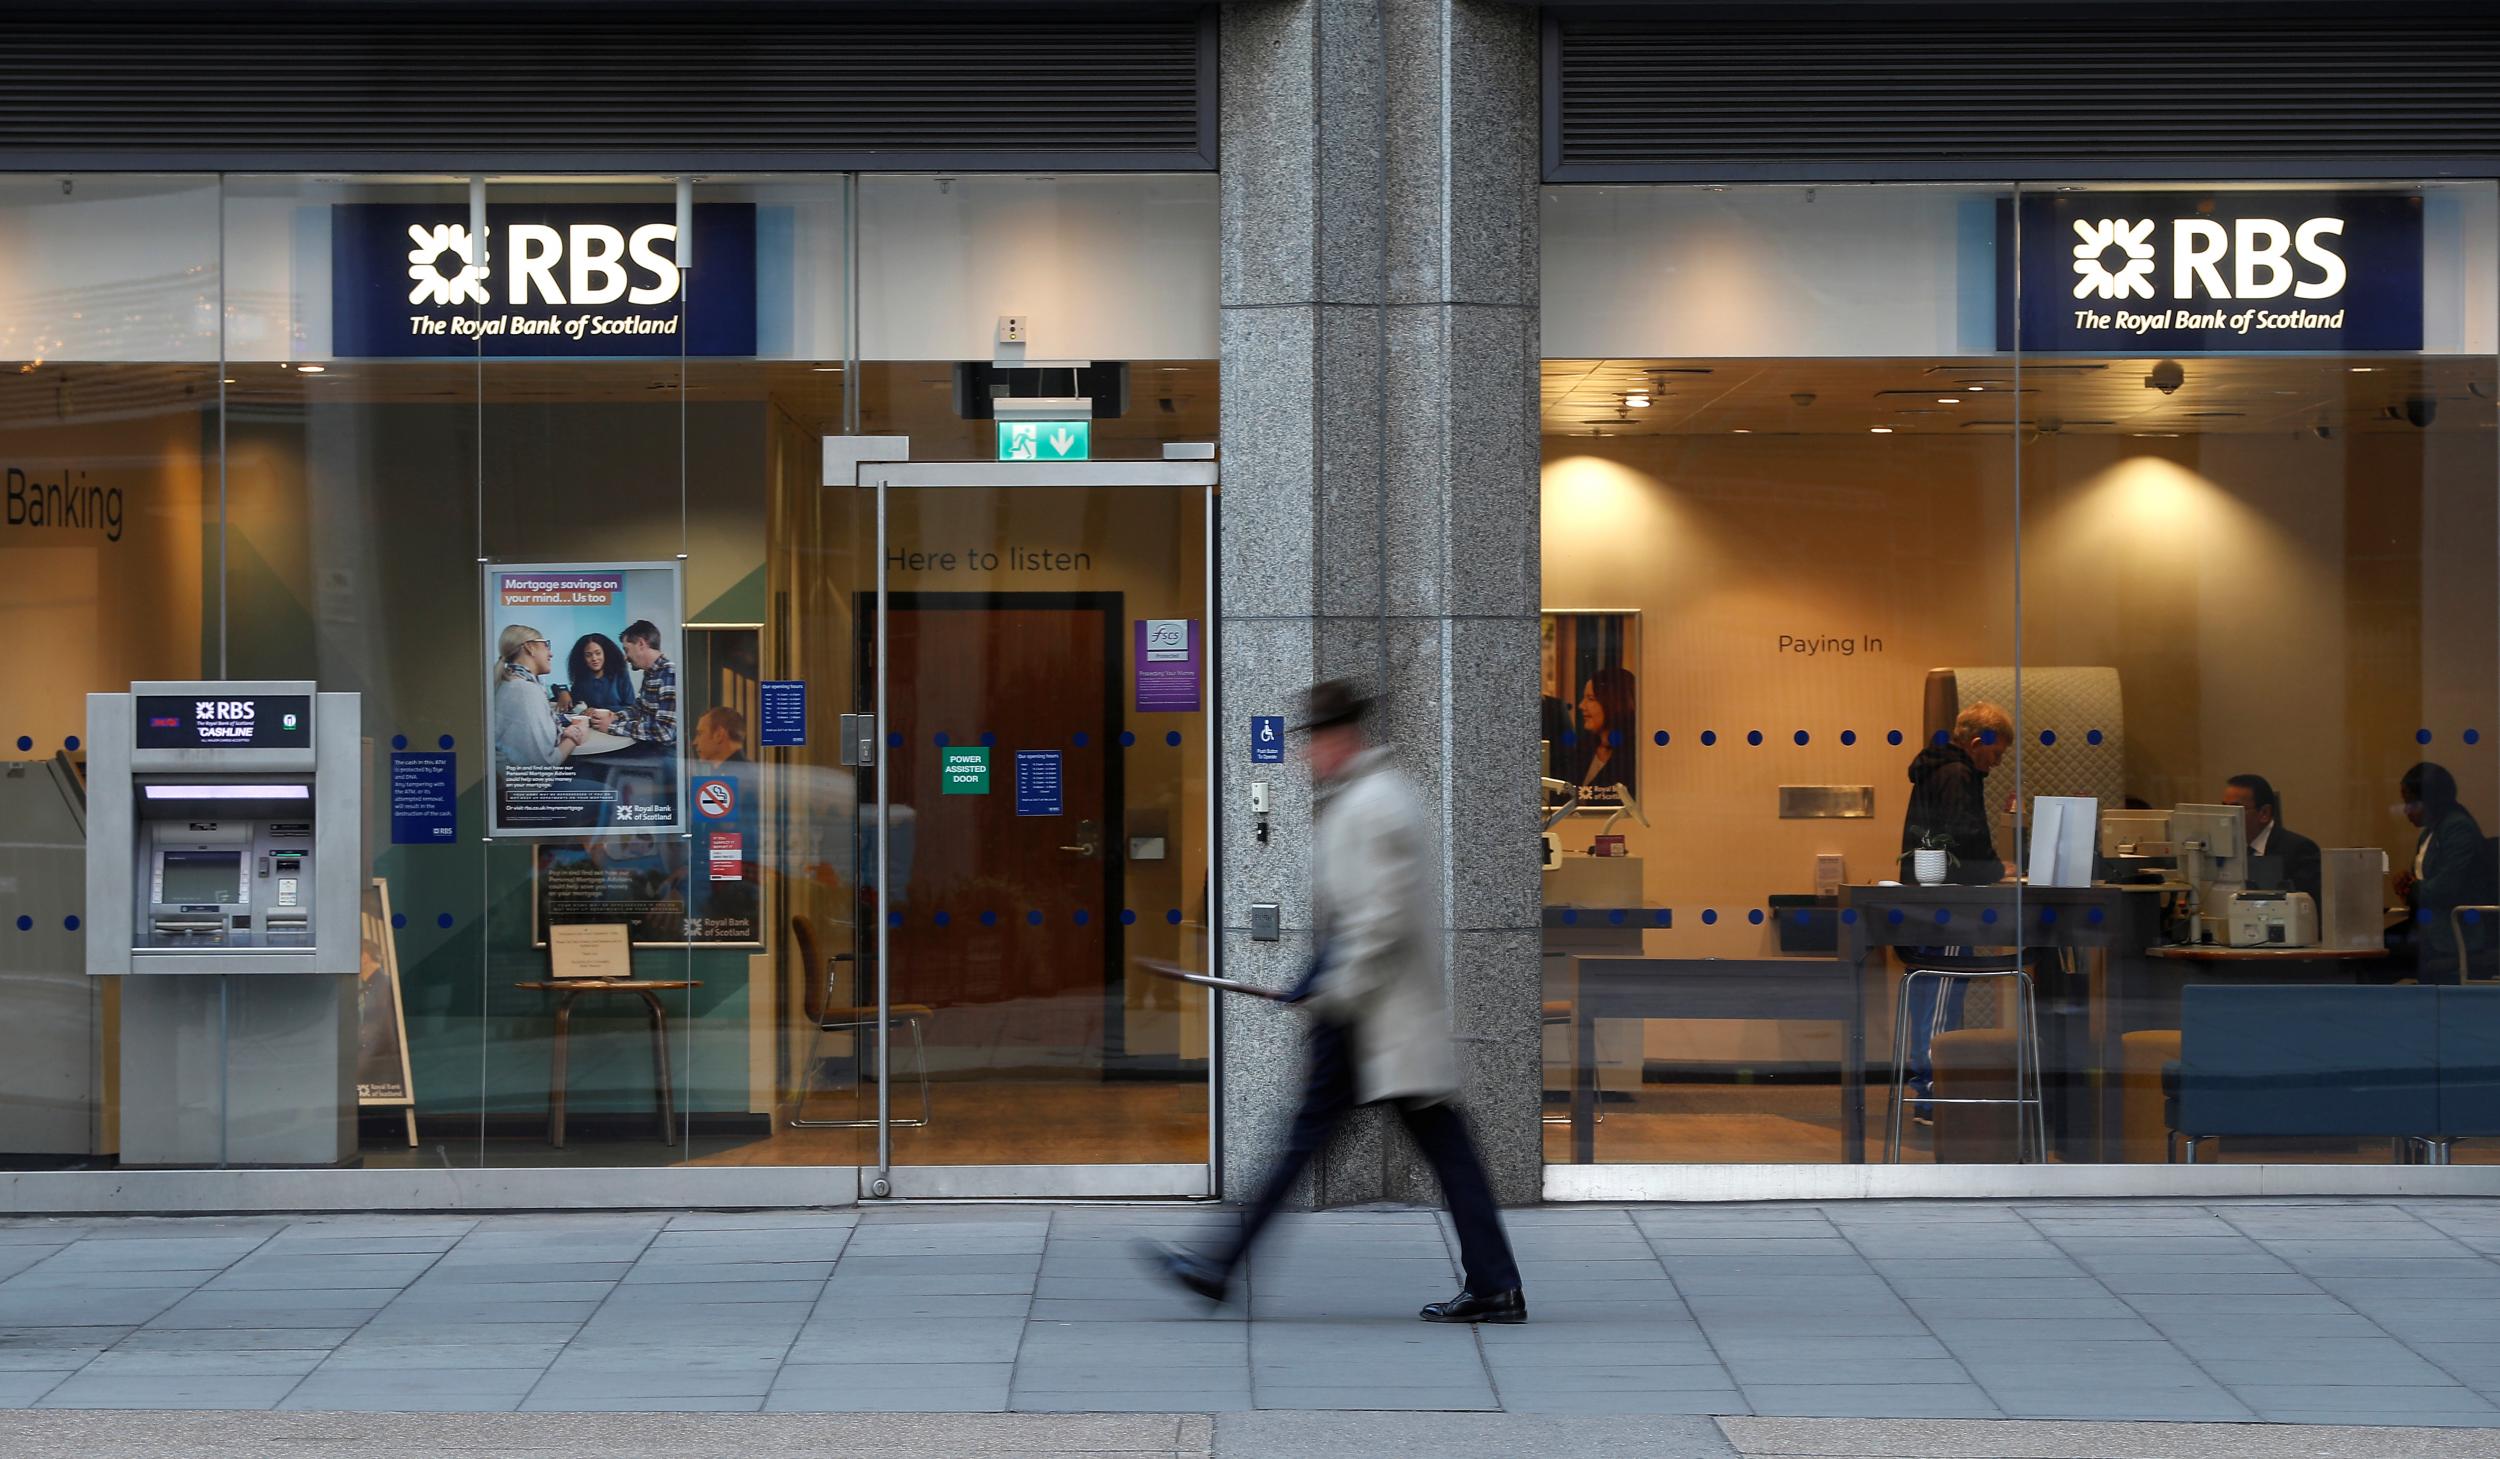 A report into the bank's actions towards small businesses was published last year after much wrangling